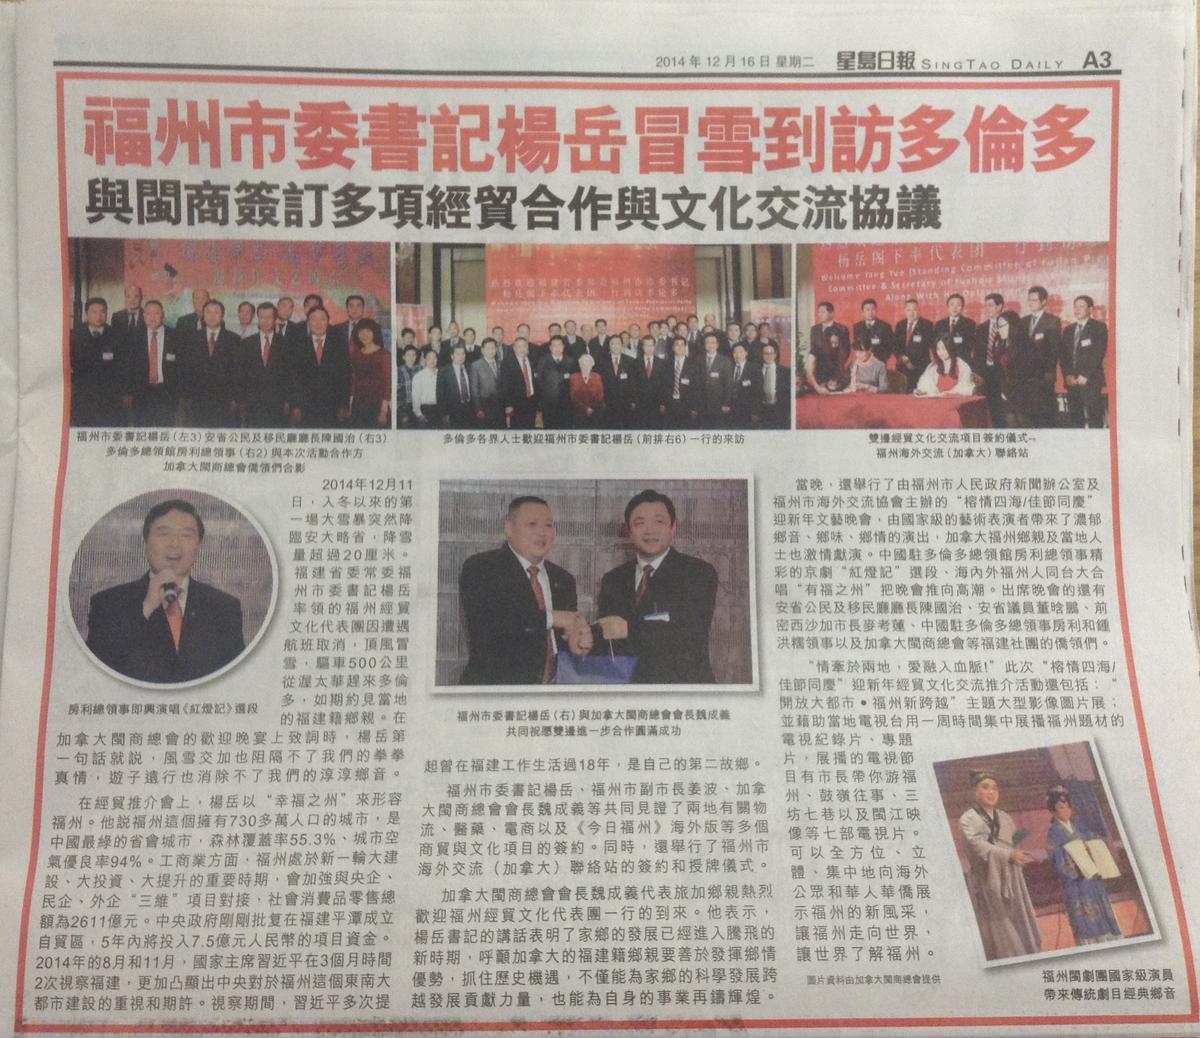 Photo shows article published on Dec. 16, 2014, in the Canadian edition of Sing Tao Daily reporting on a ceremony to welcome Fuzhou City Communist Party Secretary General Yang Yue, during which the re-launch of the Chinese Canadian Post was celebrated. The ceremony was attended by Ontario cabinet minister Michael Chan, CTCCO president Wei Chengyi, Fuzhou City Communist Party Committee Secretary General Yang Yue, and the Chinese Consul General in Toronto Fang Li. (Epoch Times)